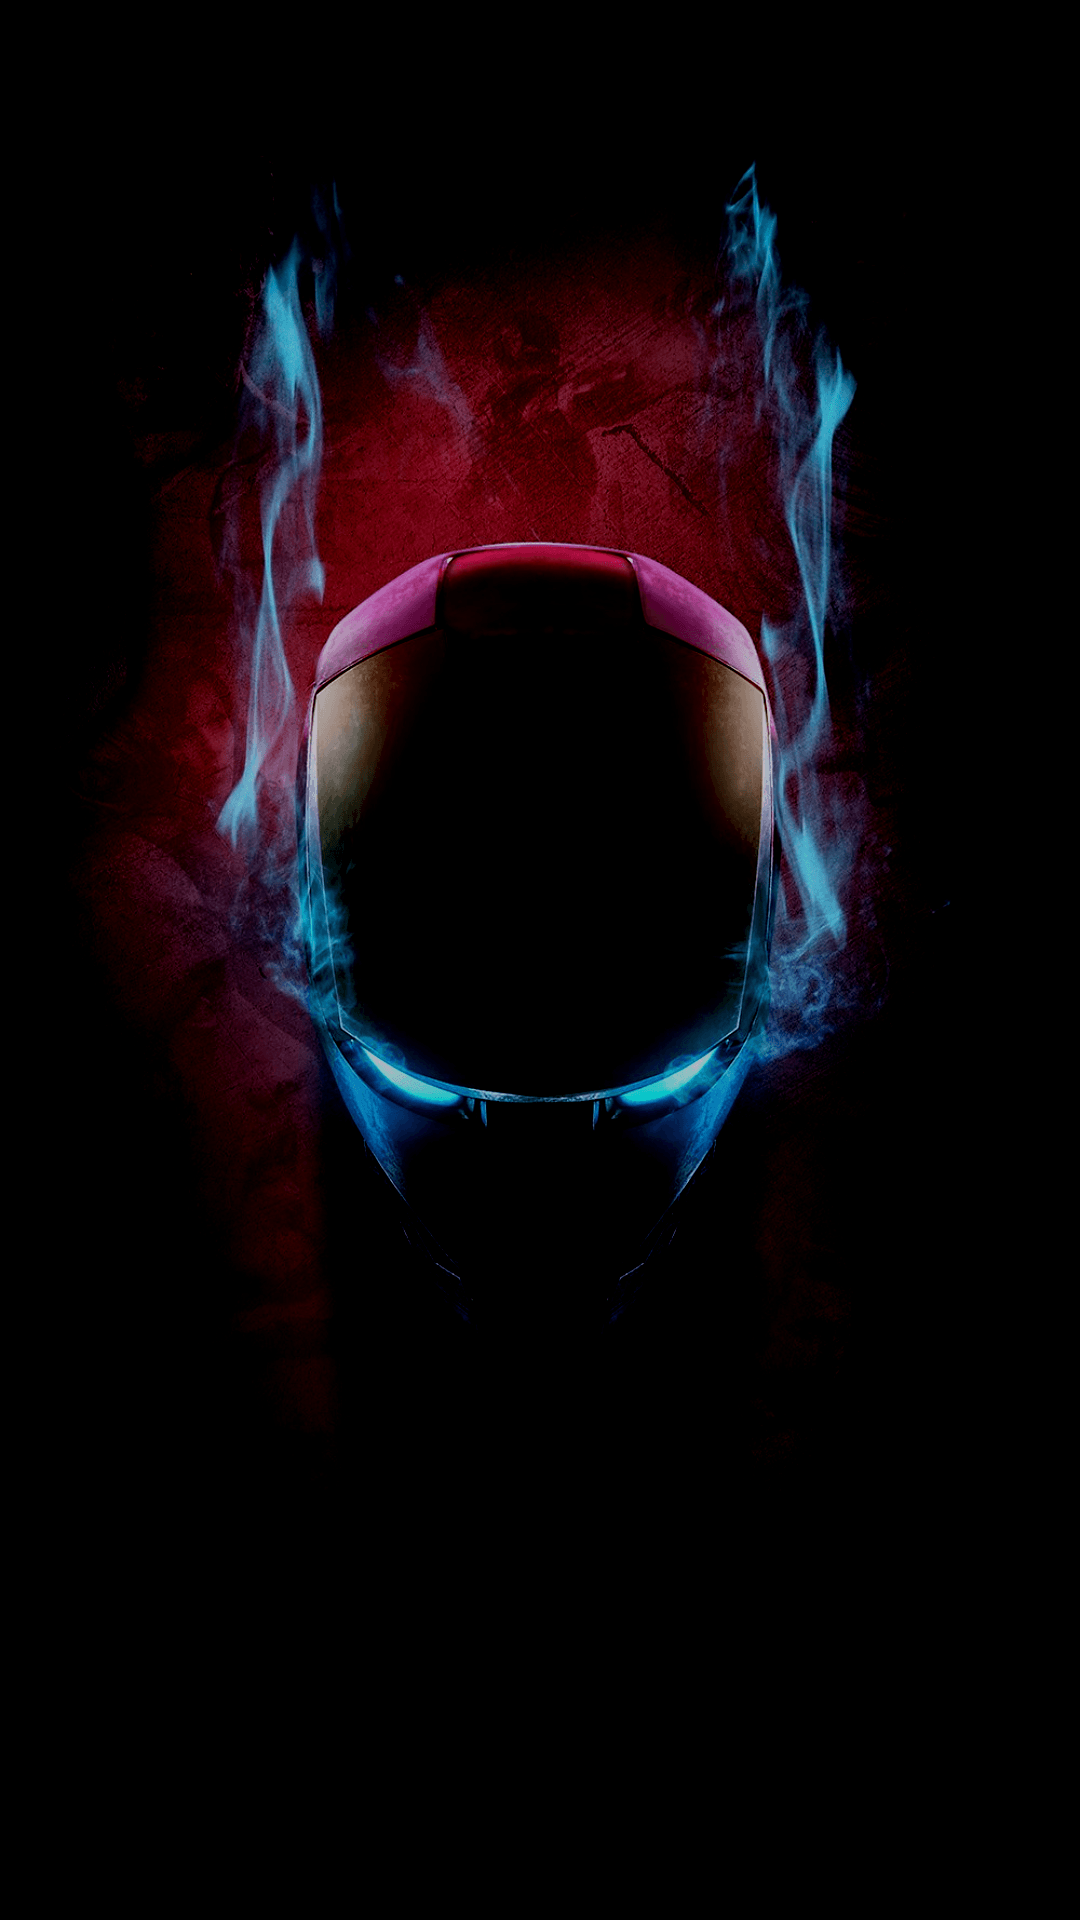 Took BossLogic's post and tried to turn it into an AMOLED wallpaper. Iron Man completing 11 Years! [1080 x 1920]